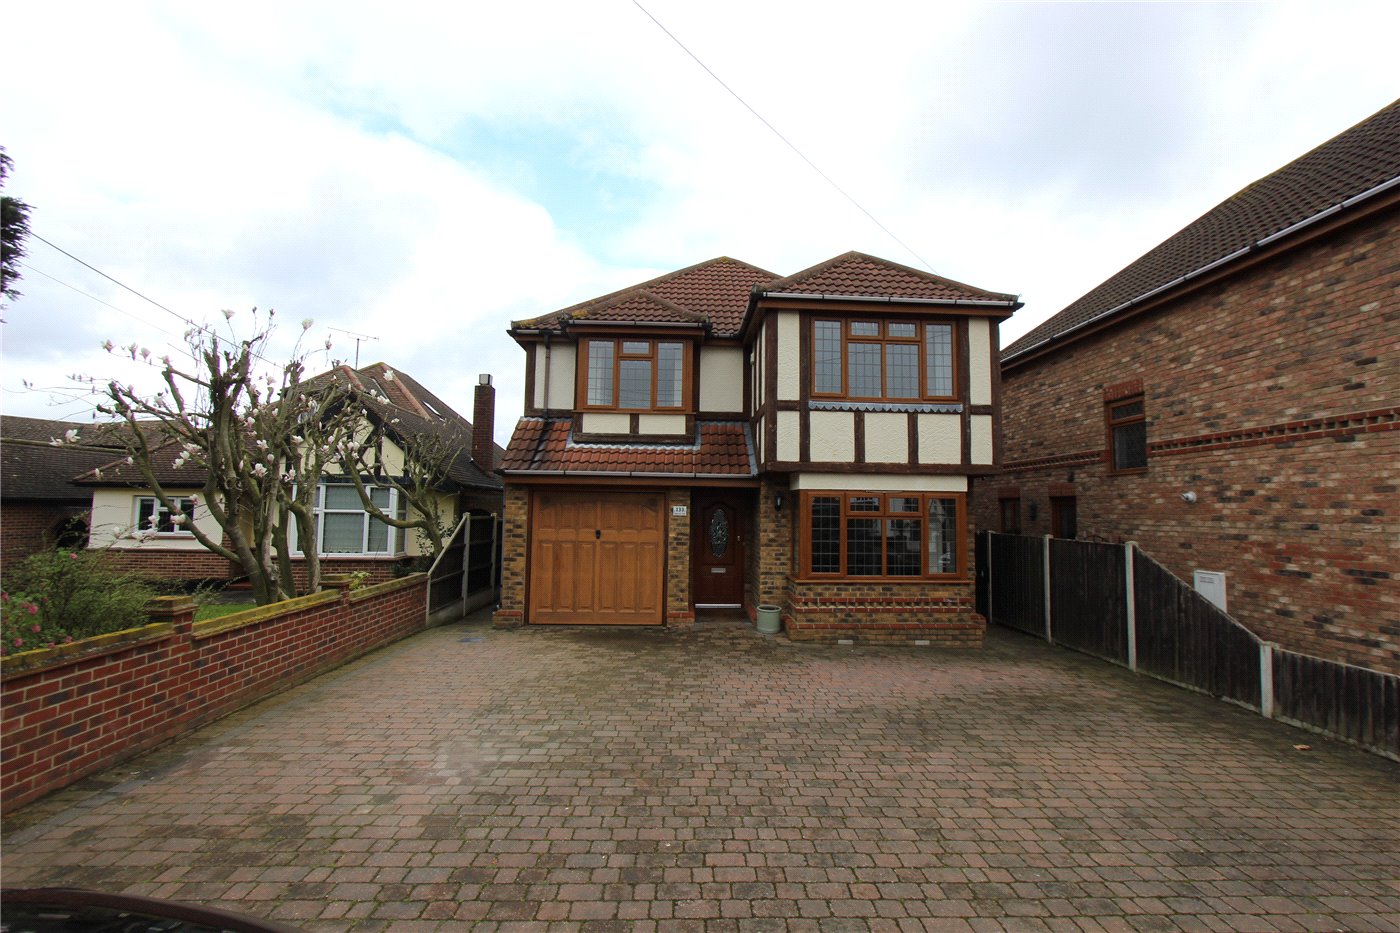 Eastwood Road, Rayleigh, Essex, SS6